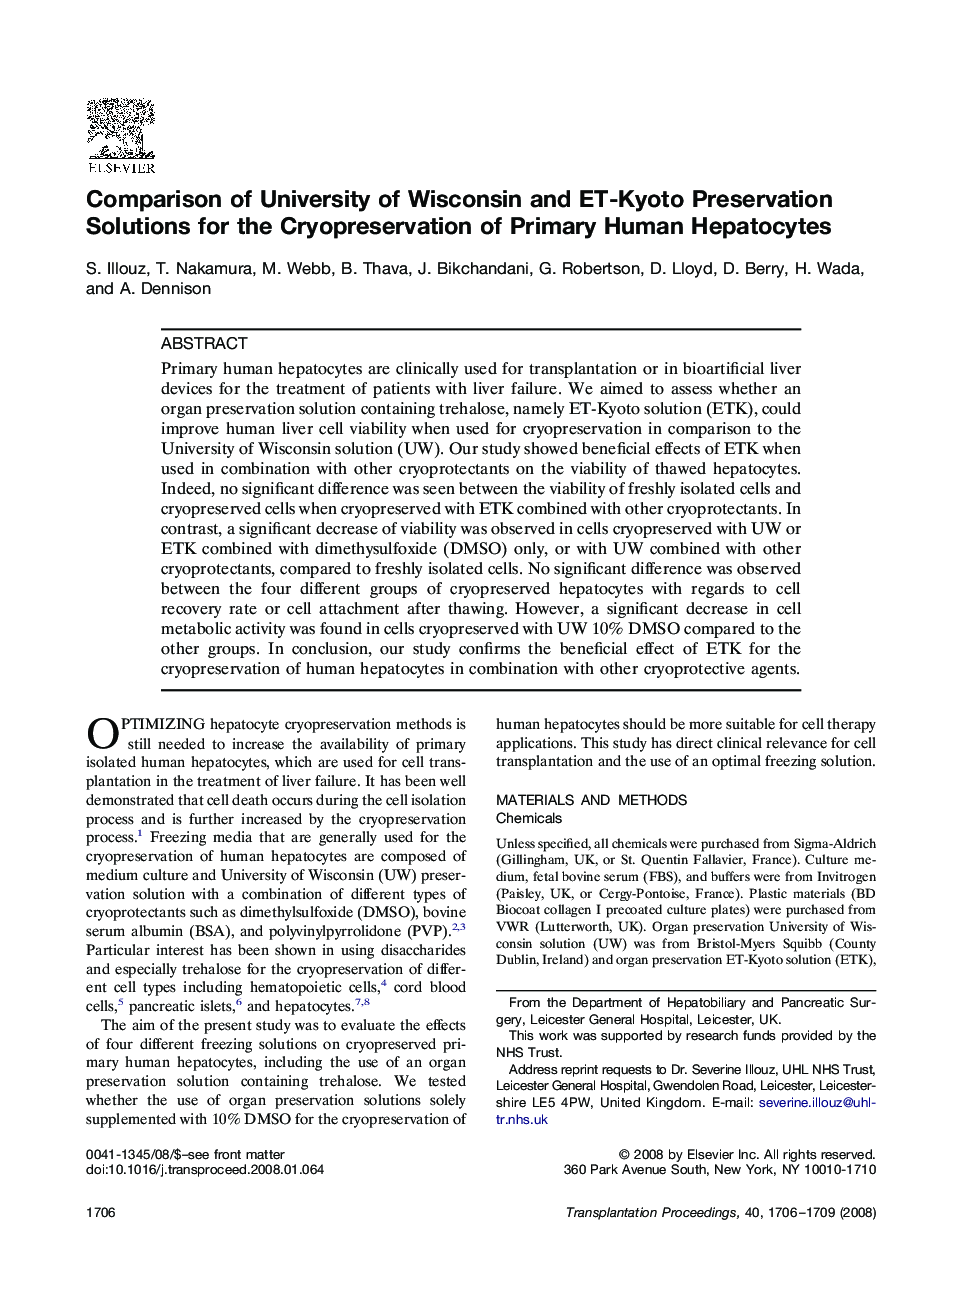 Comparison of University of Wisconsin and ET-Kyoto Preservation Solutions for the Cryopreservation of Primary Human Hepatocytes 